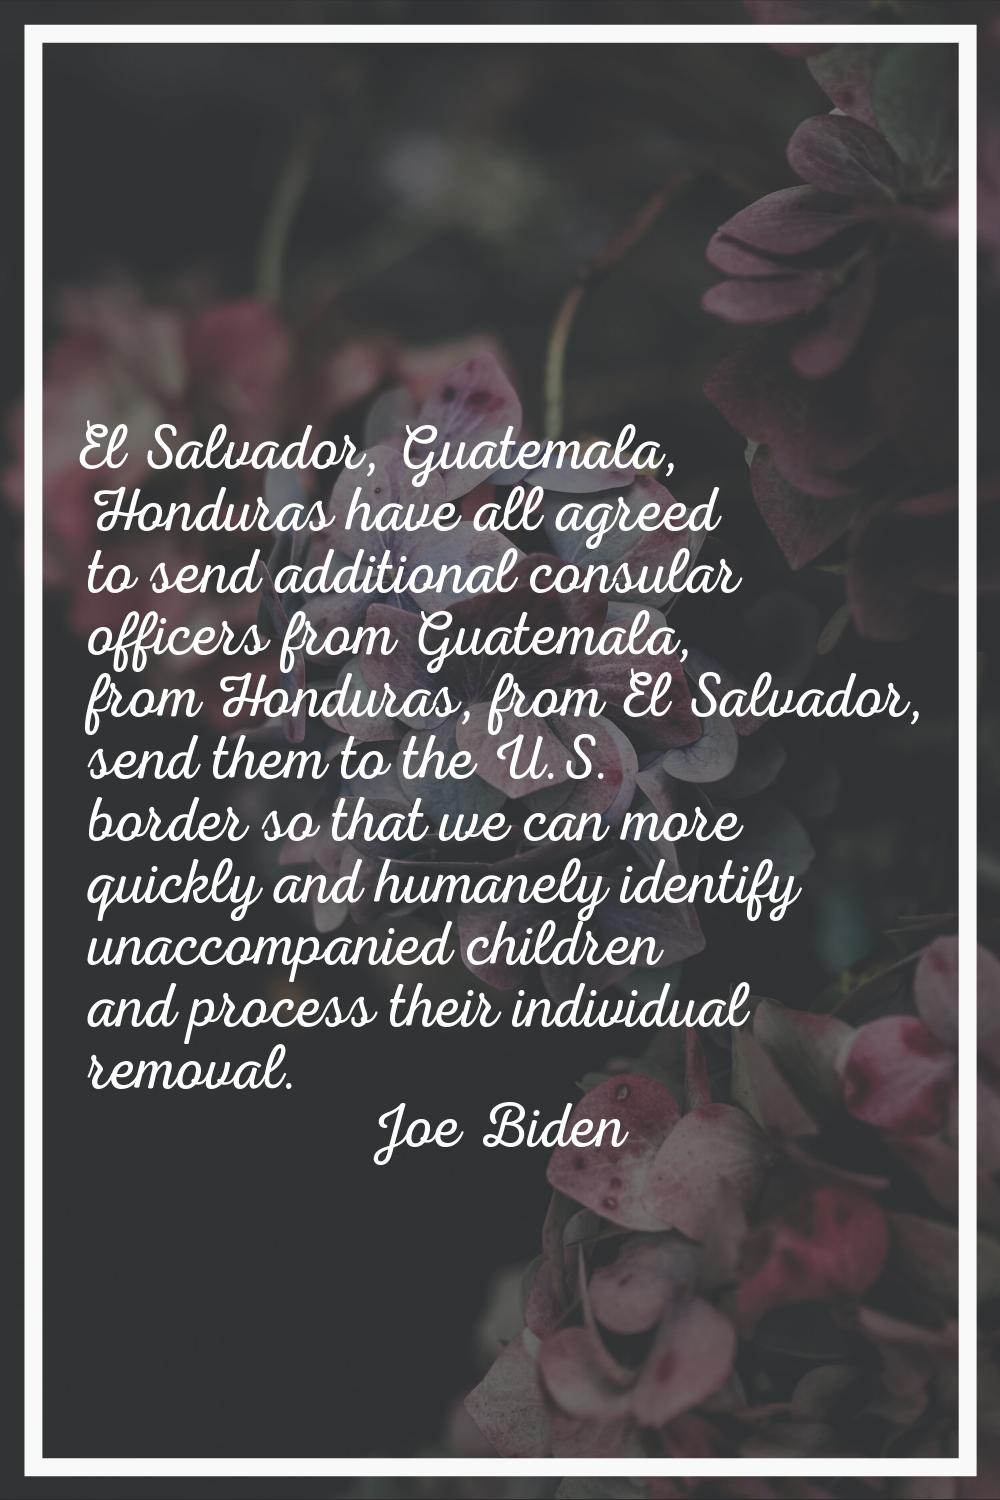 El Salvador, Guatemala, Honduras have all agreed to send additional consular officers from Guatemal